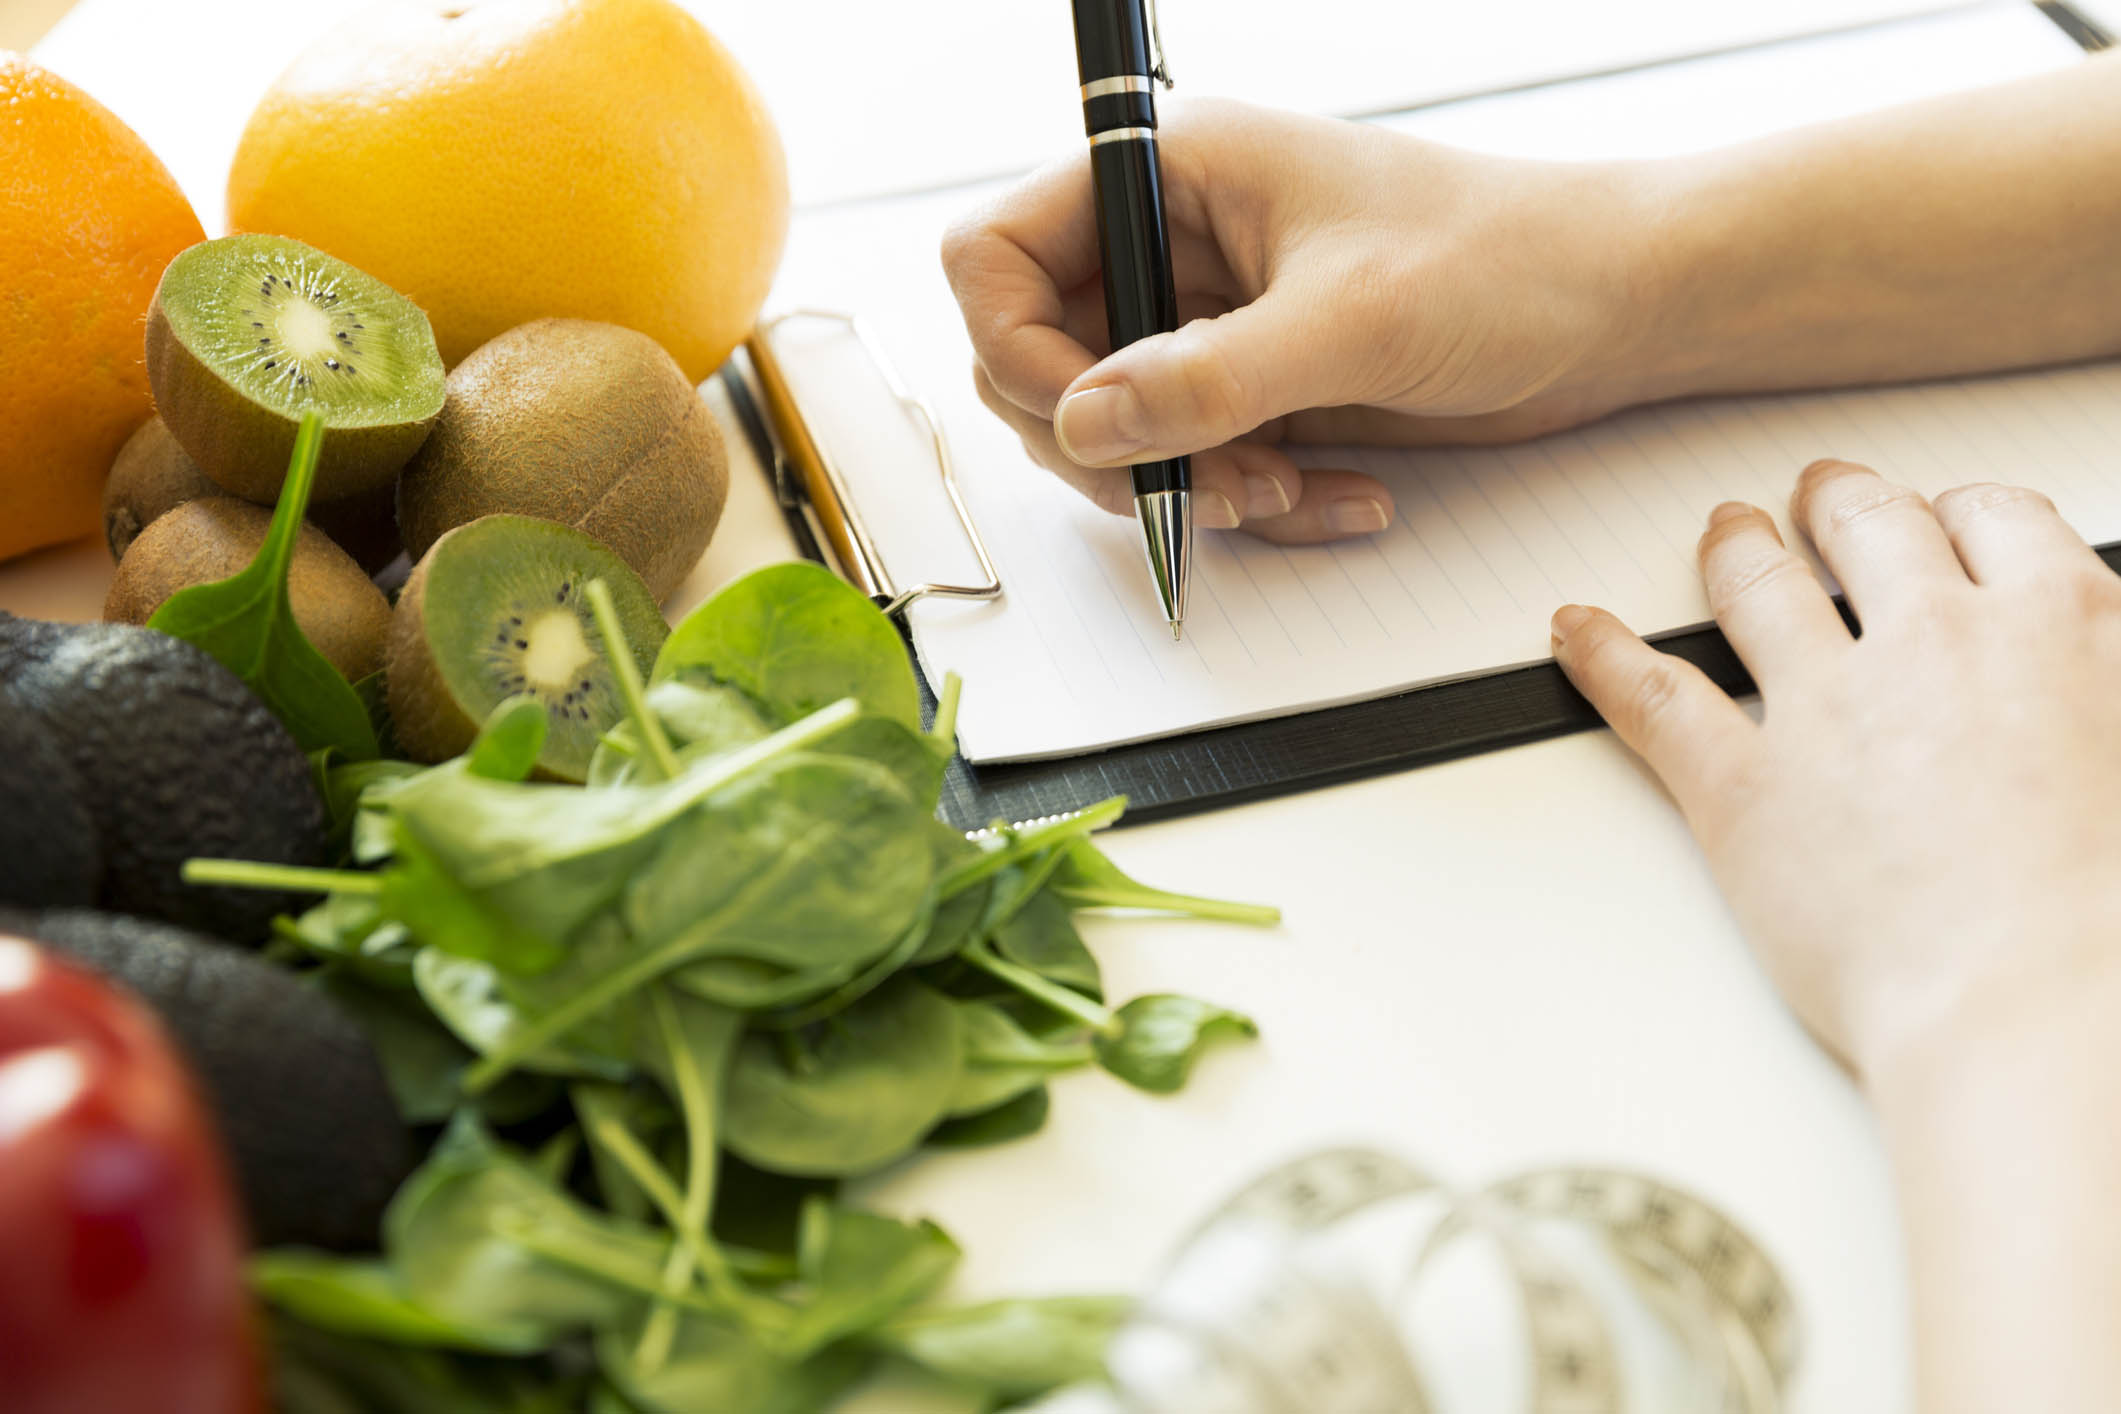 Nutritionist woman writing diet plan on table full of fruits and vegetables